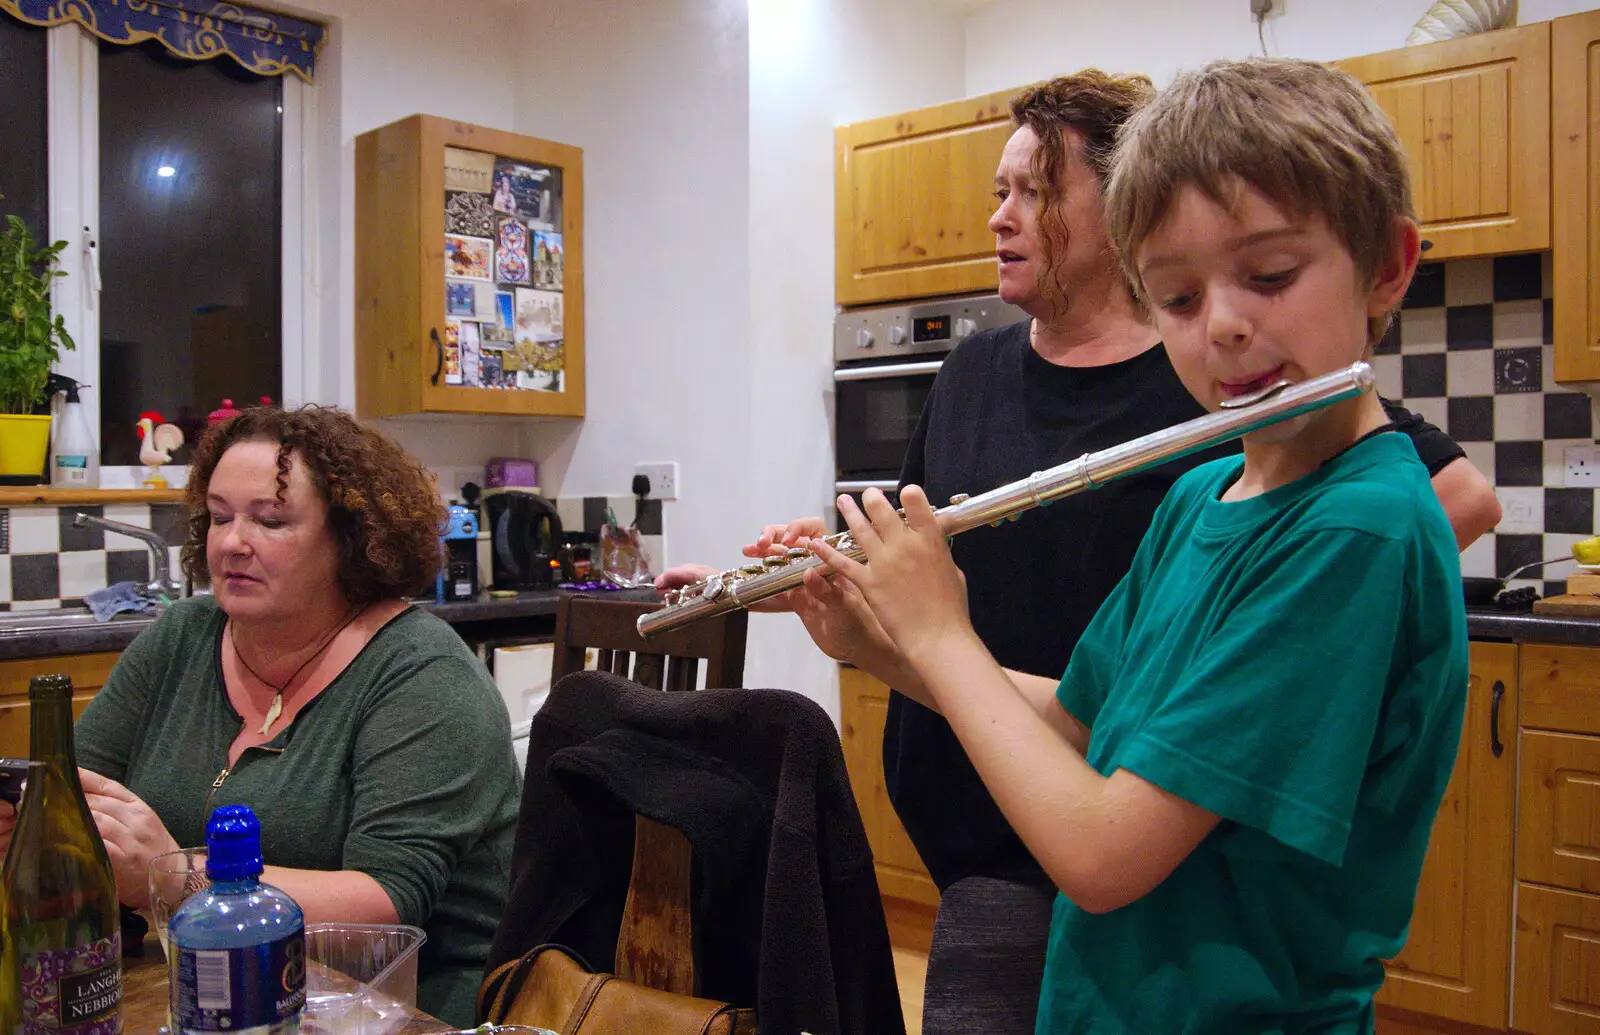 Fred plays flute in the kitchen, from The Summer Trip to Ireland, Monkstown, Co. Dublin, Ireland - 9th August 2019